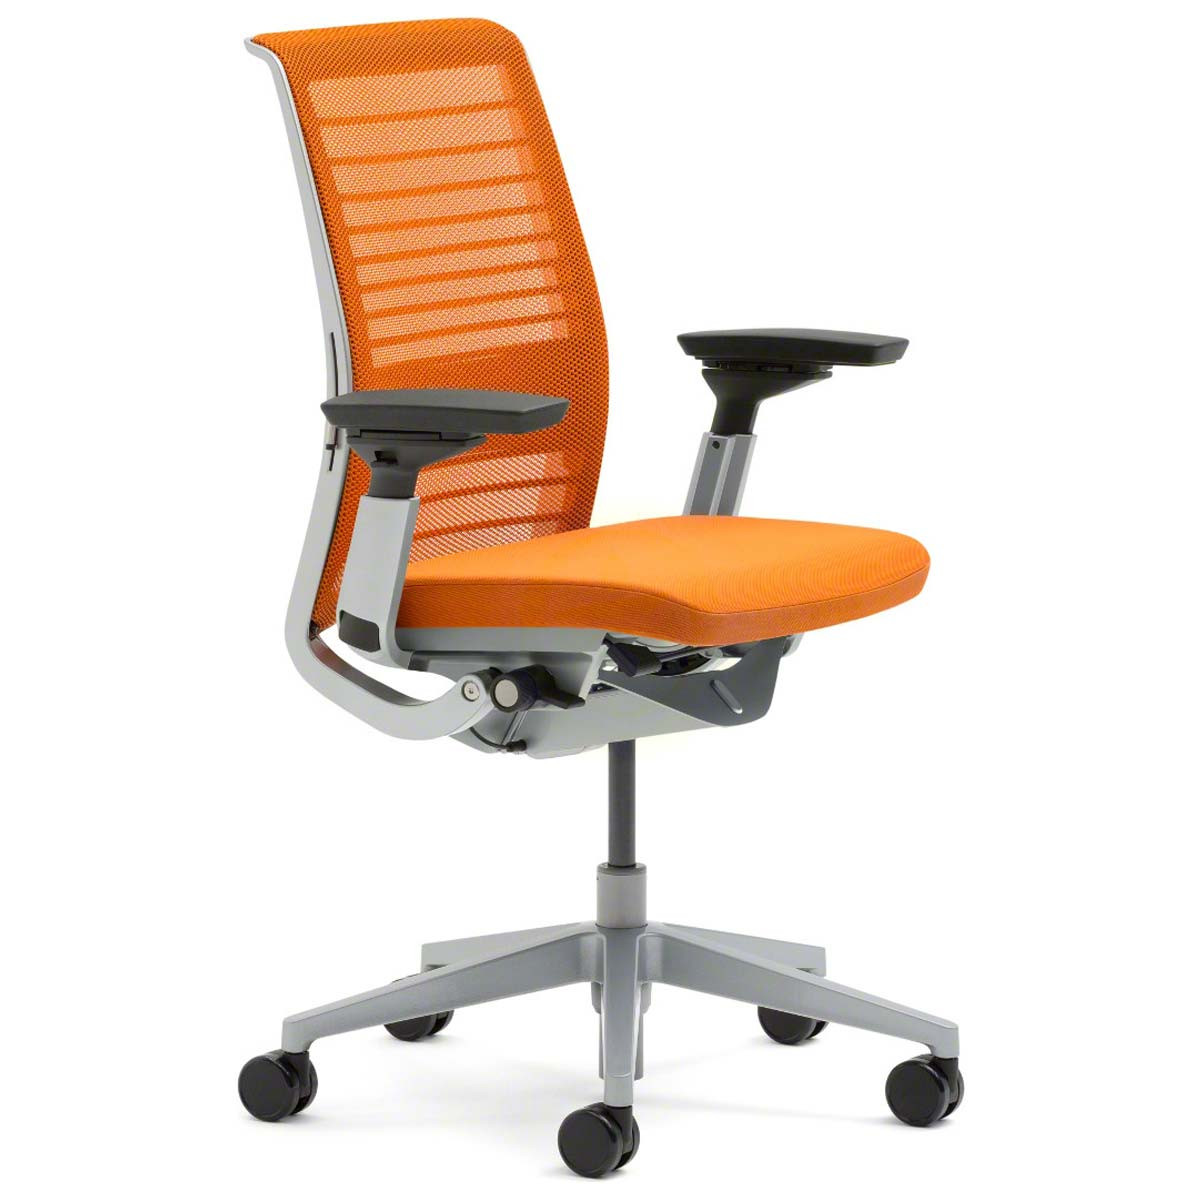 Standard Carpet Casters Steelcase Leap Desk Task Chair in Buzz2 5G53 Sunrise Fabric with Headrest 4-Way Highly Adjustable Arms Platinum Frame and Base 